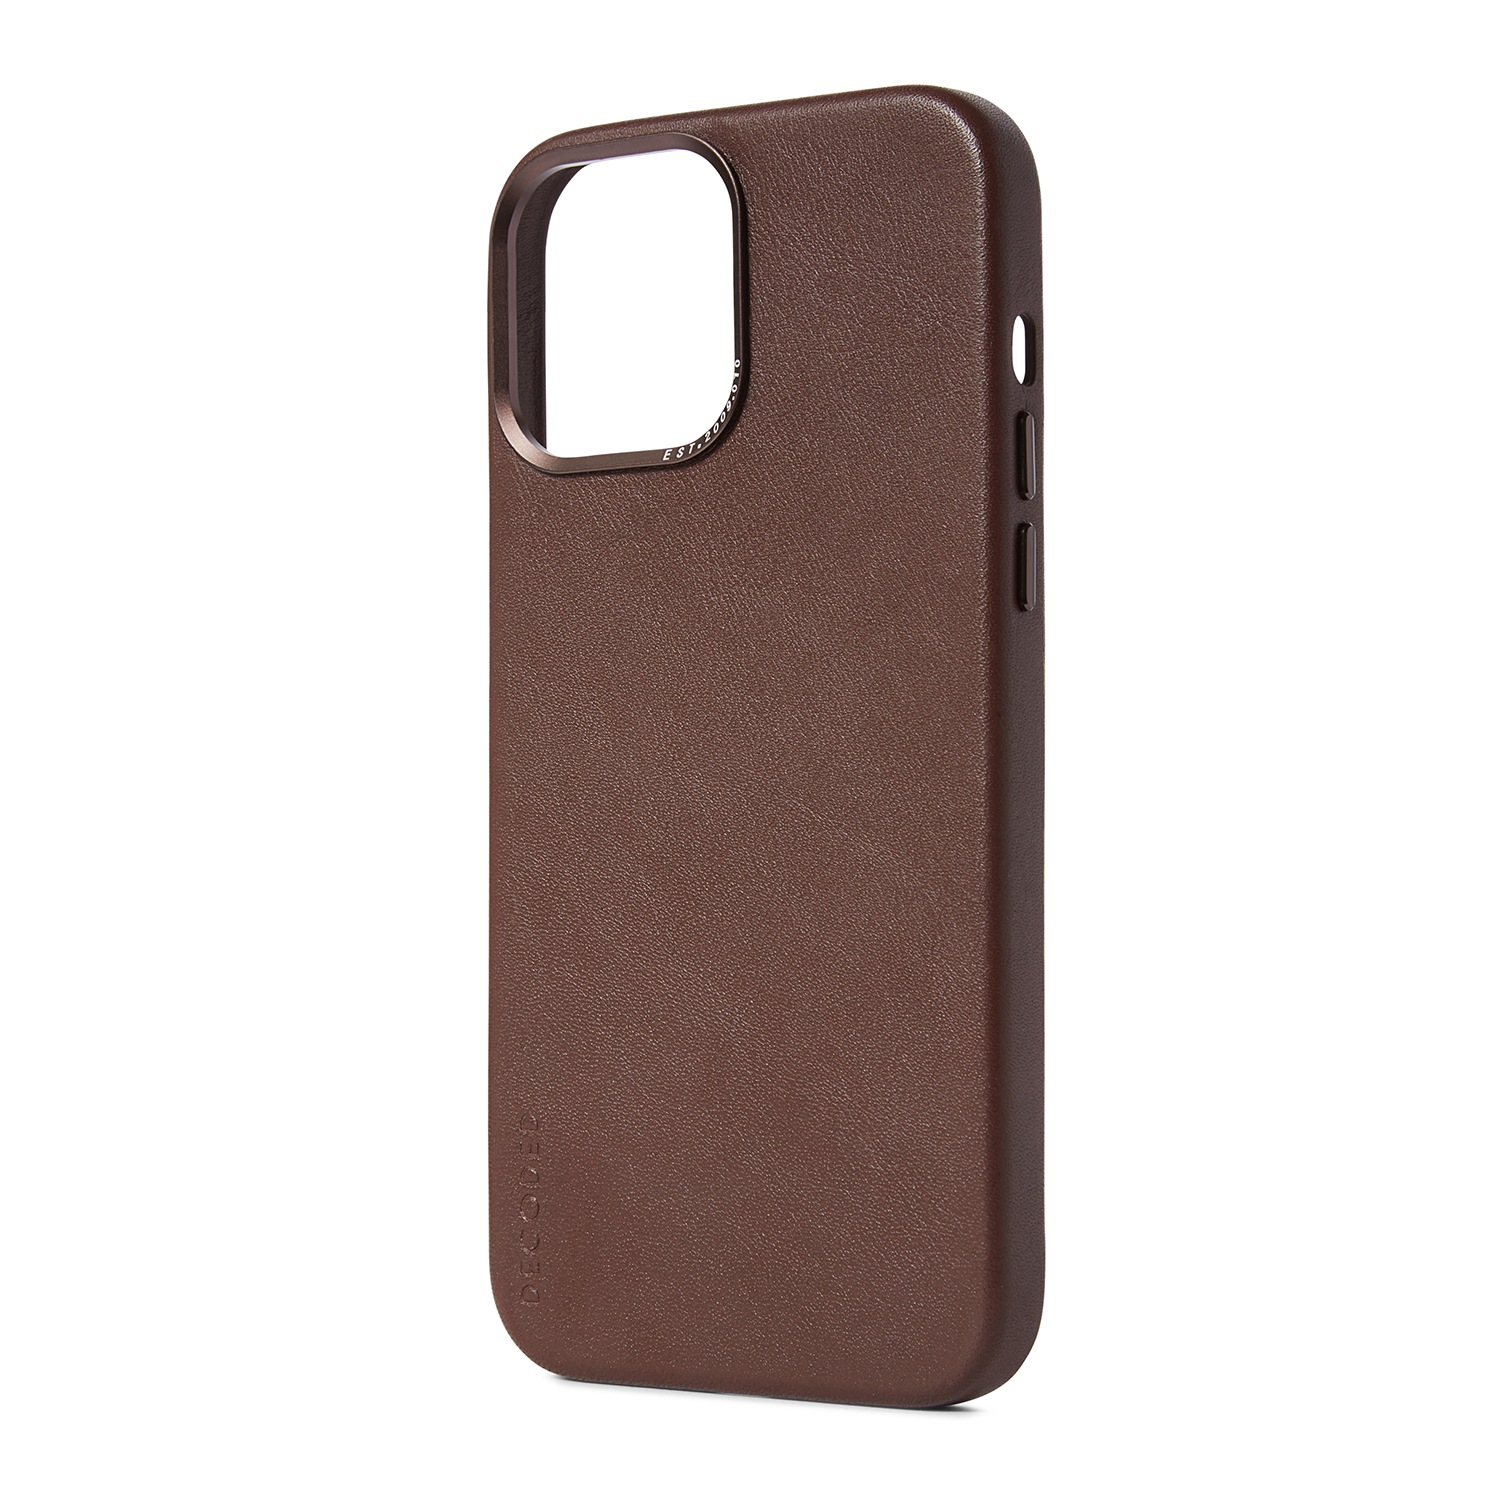 DECODED Smartphone-Hülle »Decoded Leather Backcover iPhone 13 Pro Max«, iPhone 13 Pro Max